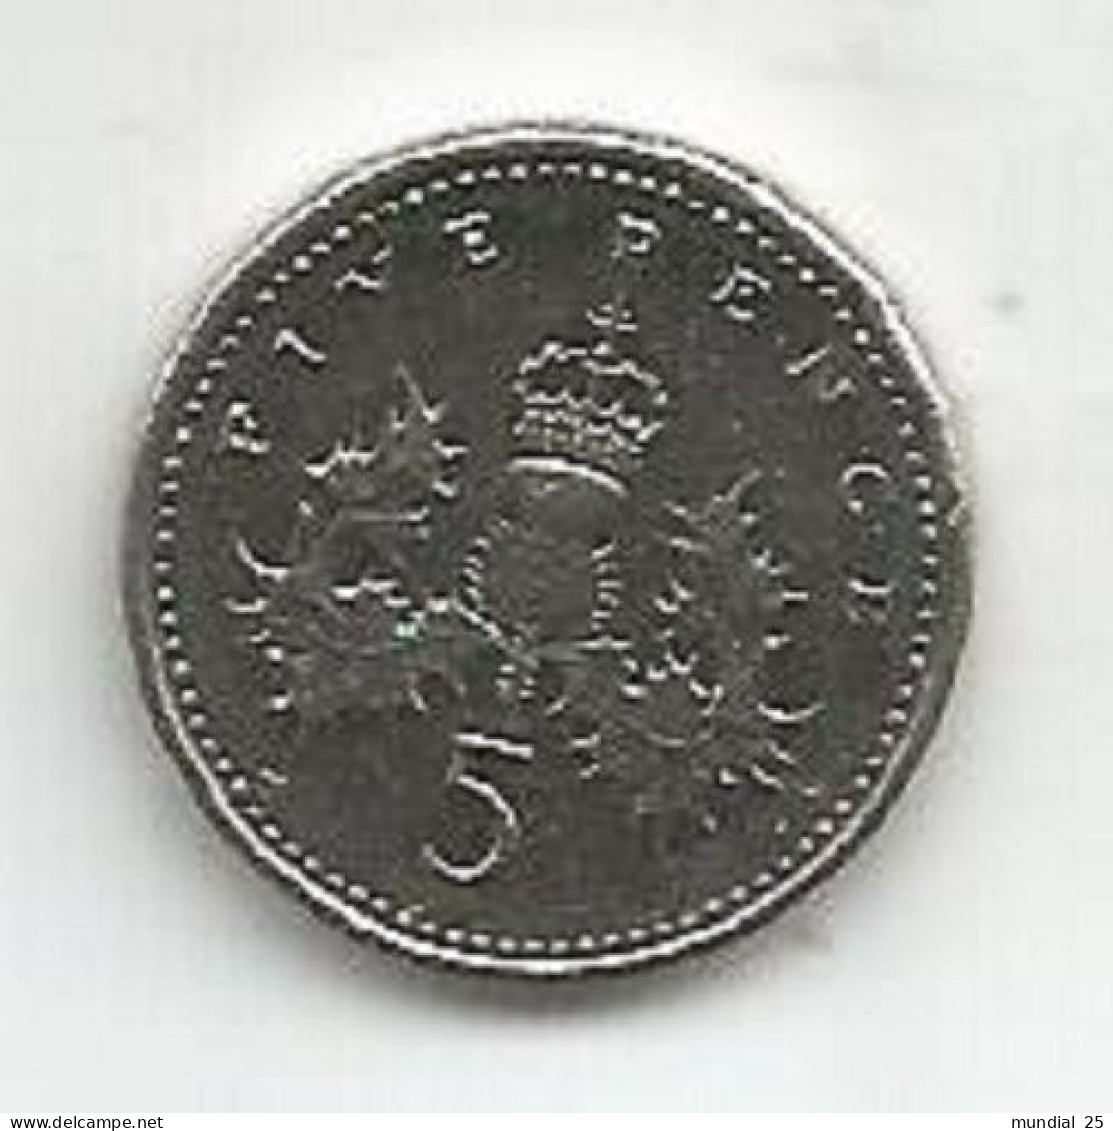 GREAT BRITAIN 5 PENCE 2000 - 5 Pence & 5 New Pence